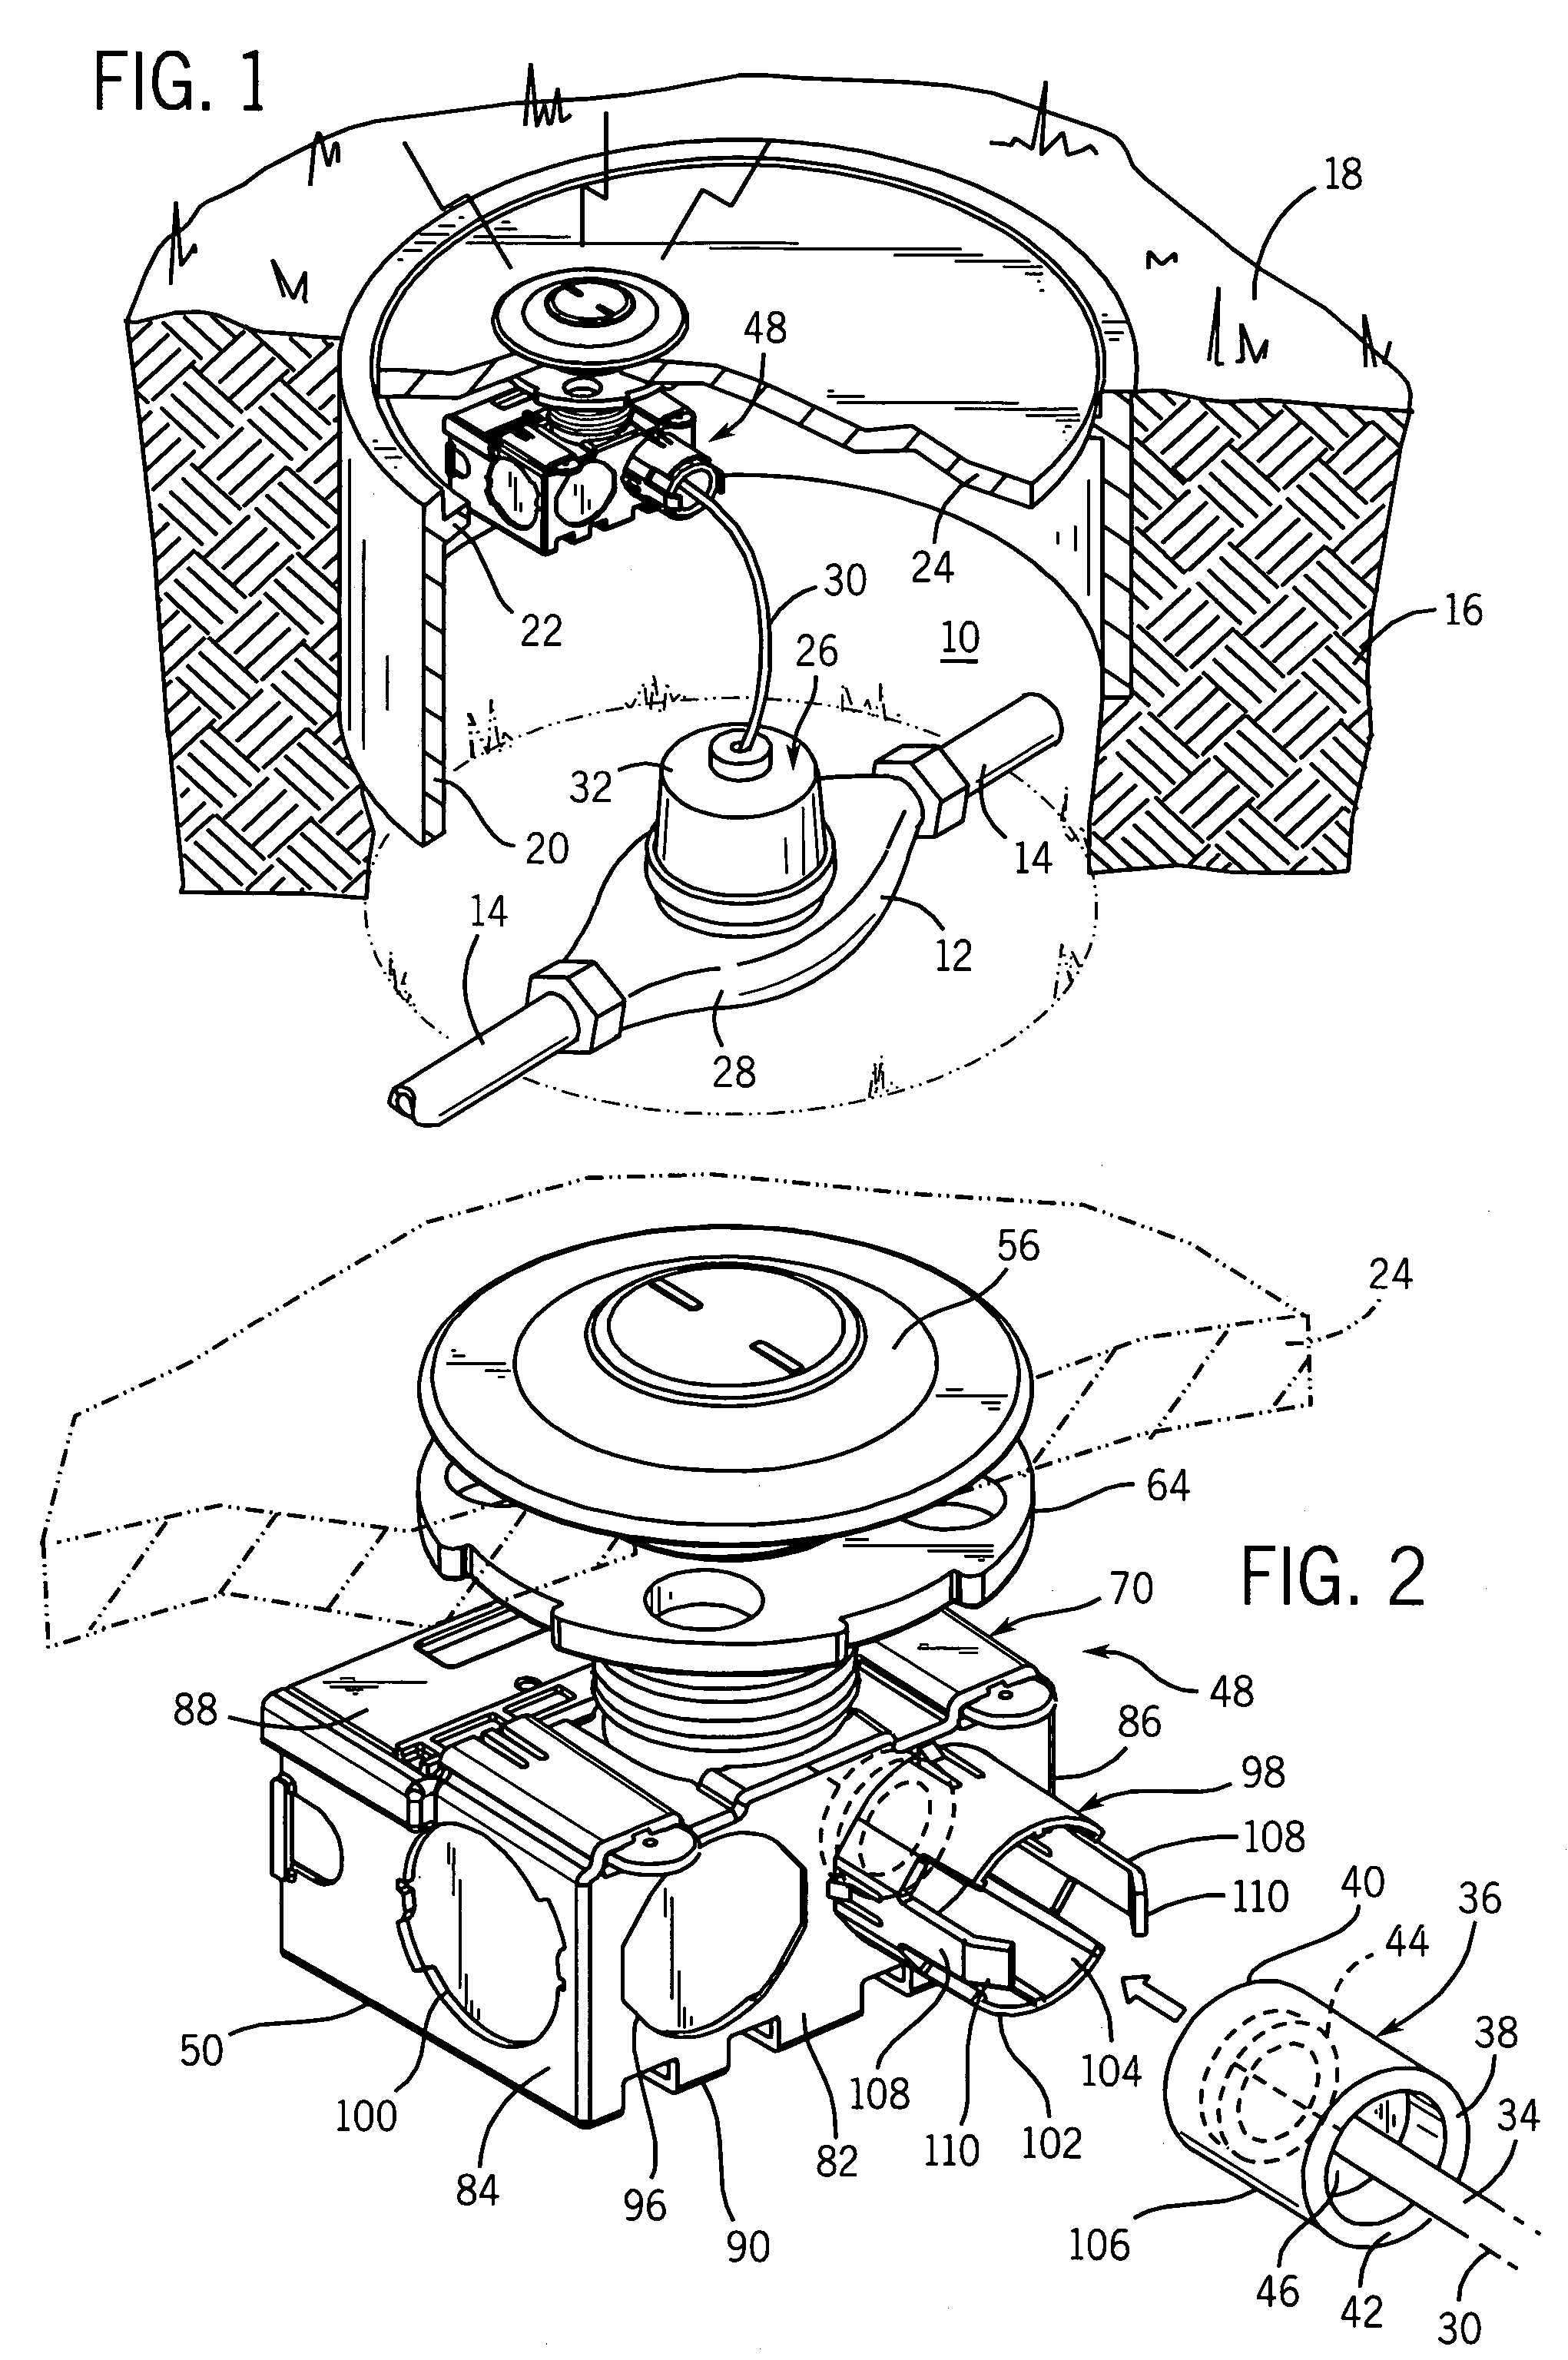 Method and apparatus for coupling a meter register to an automatic meter reading communication device